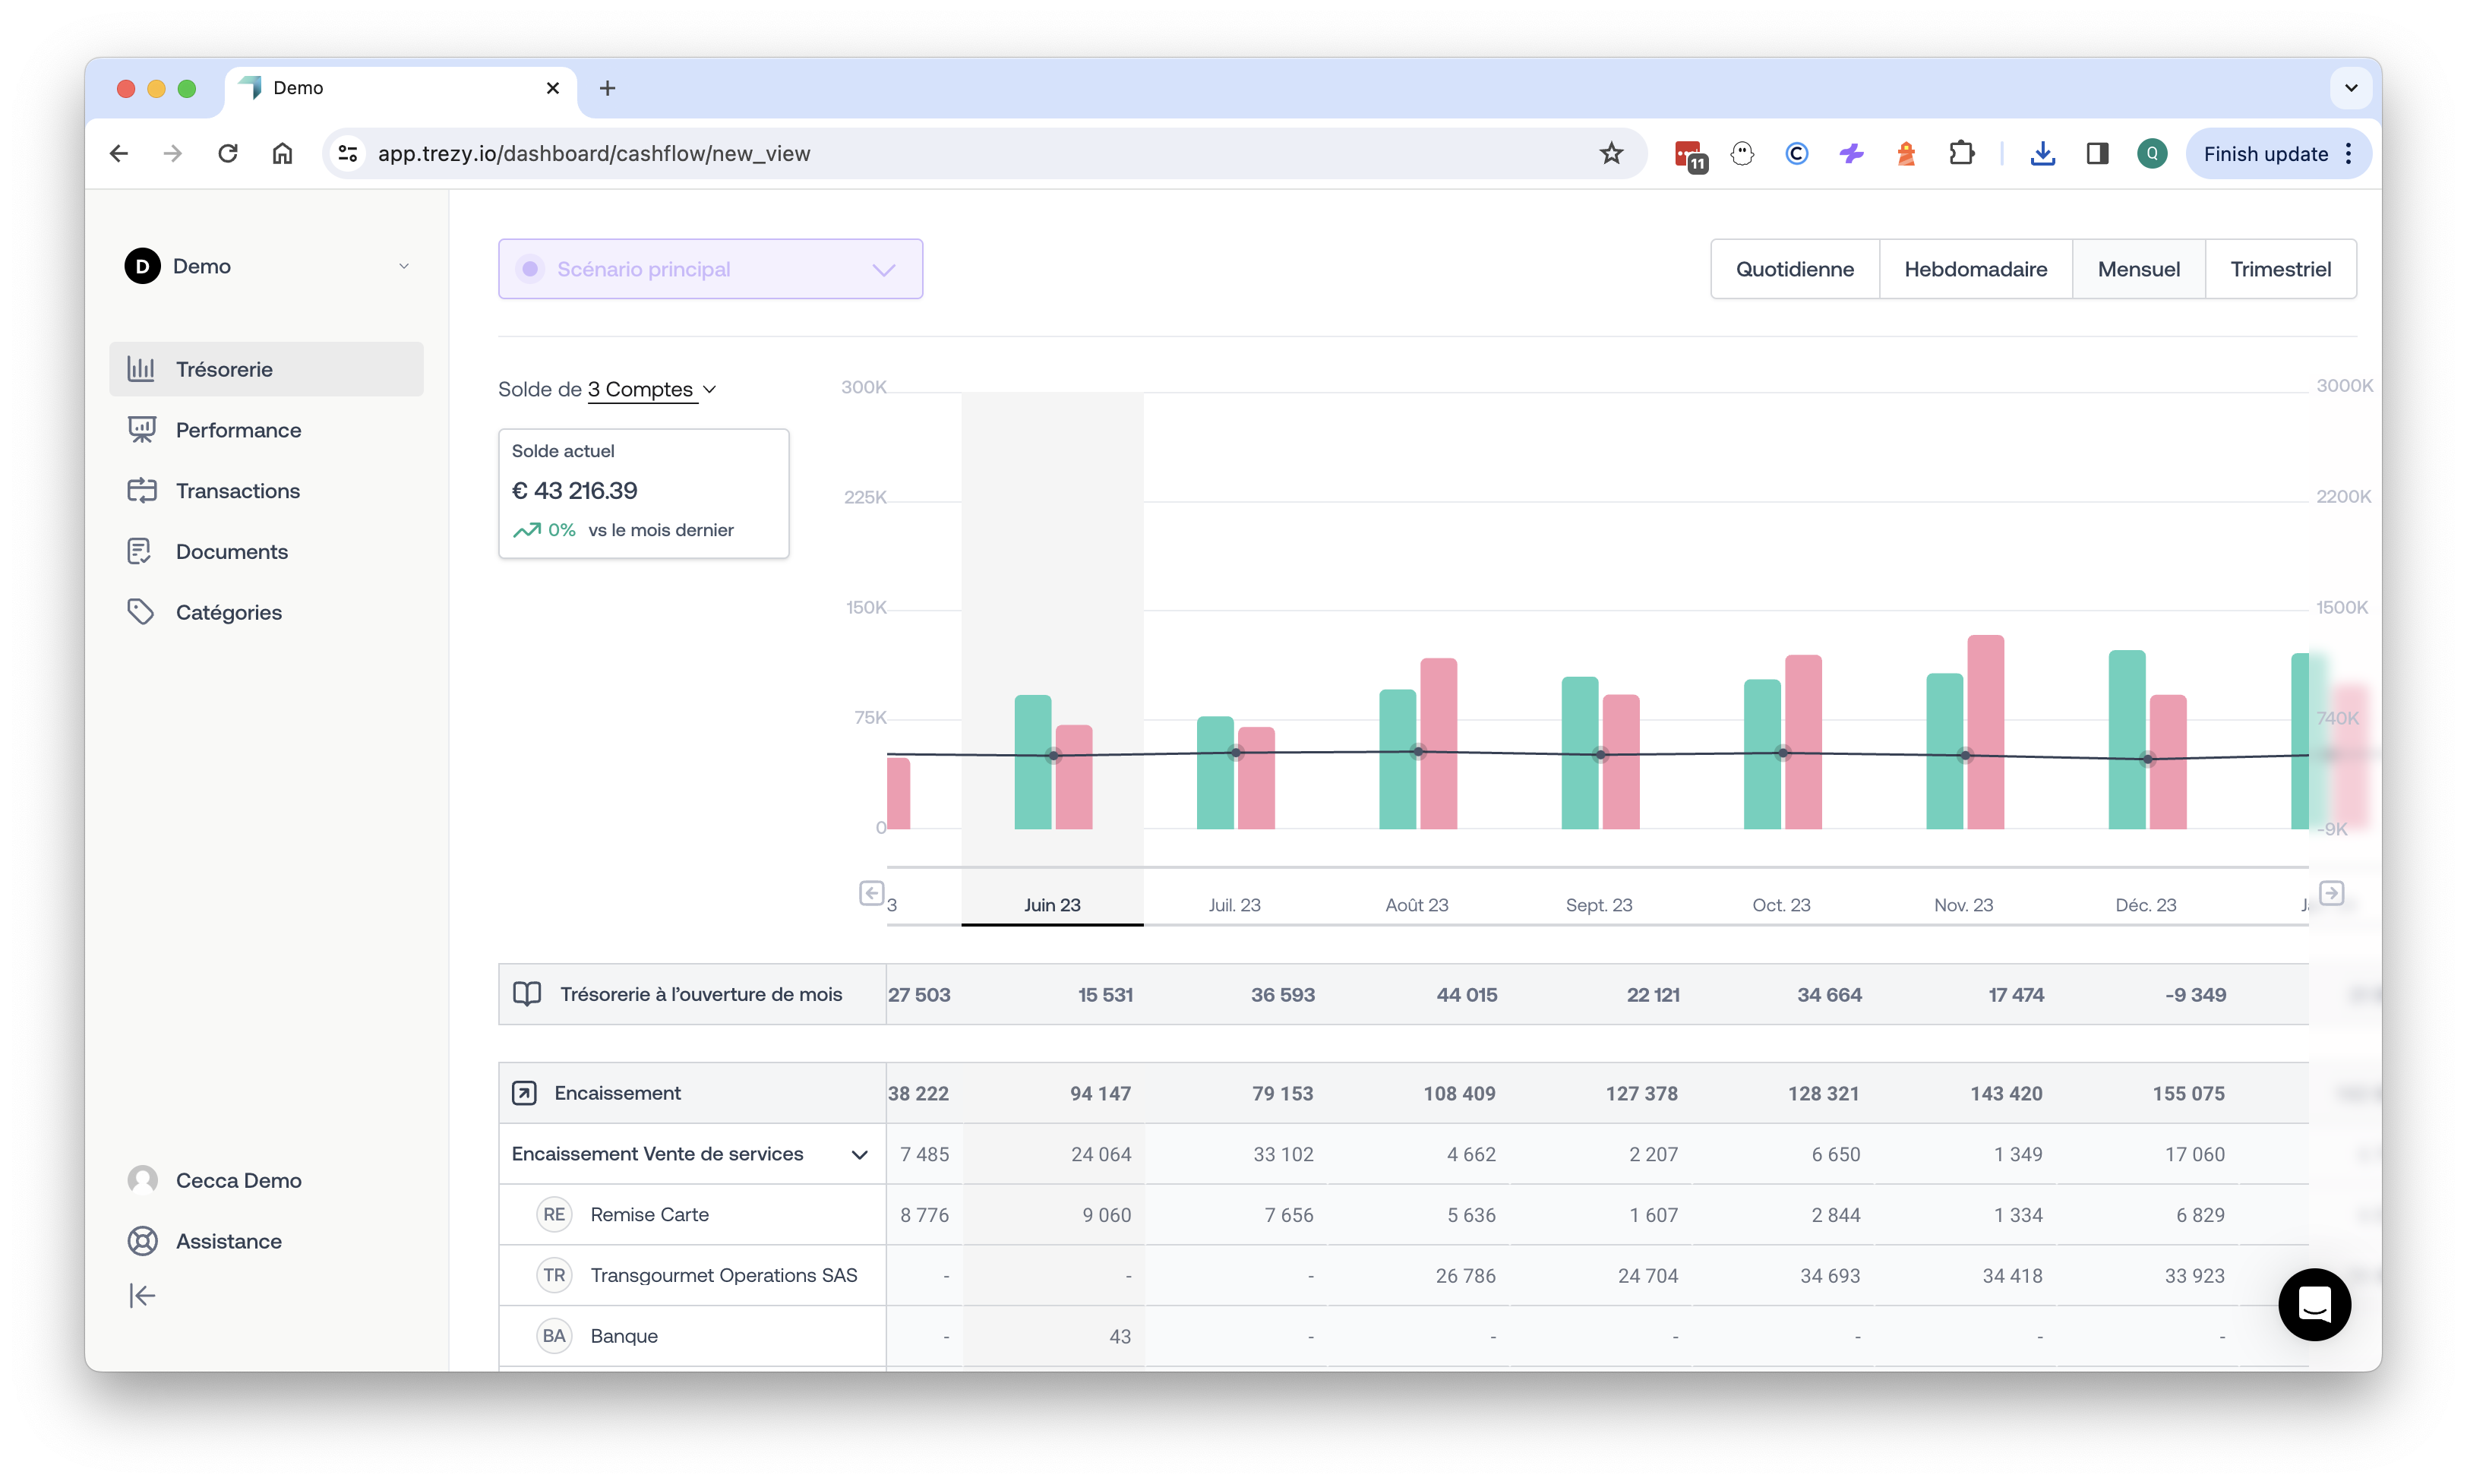 "Track your cash flow trends with Trezy—get immediate access to financial data across multiple accounts, aiding smart cash management and forecasting."

